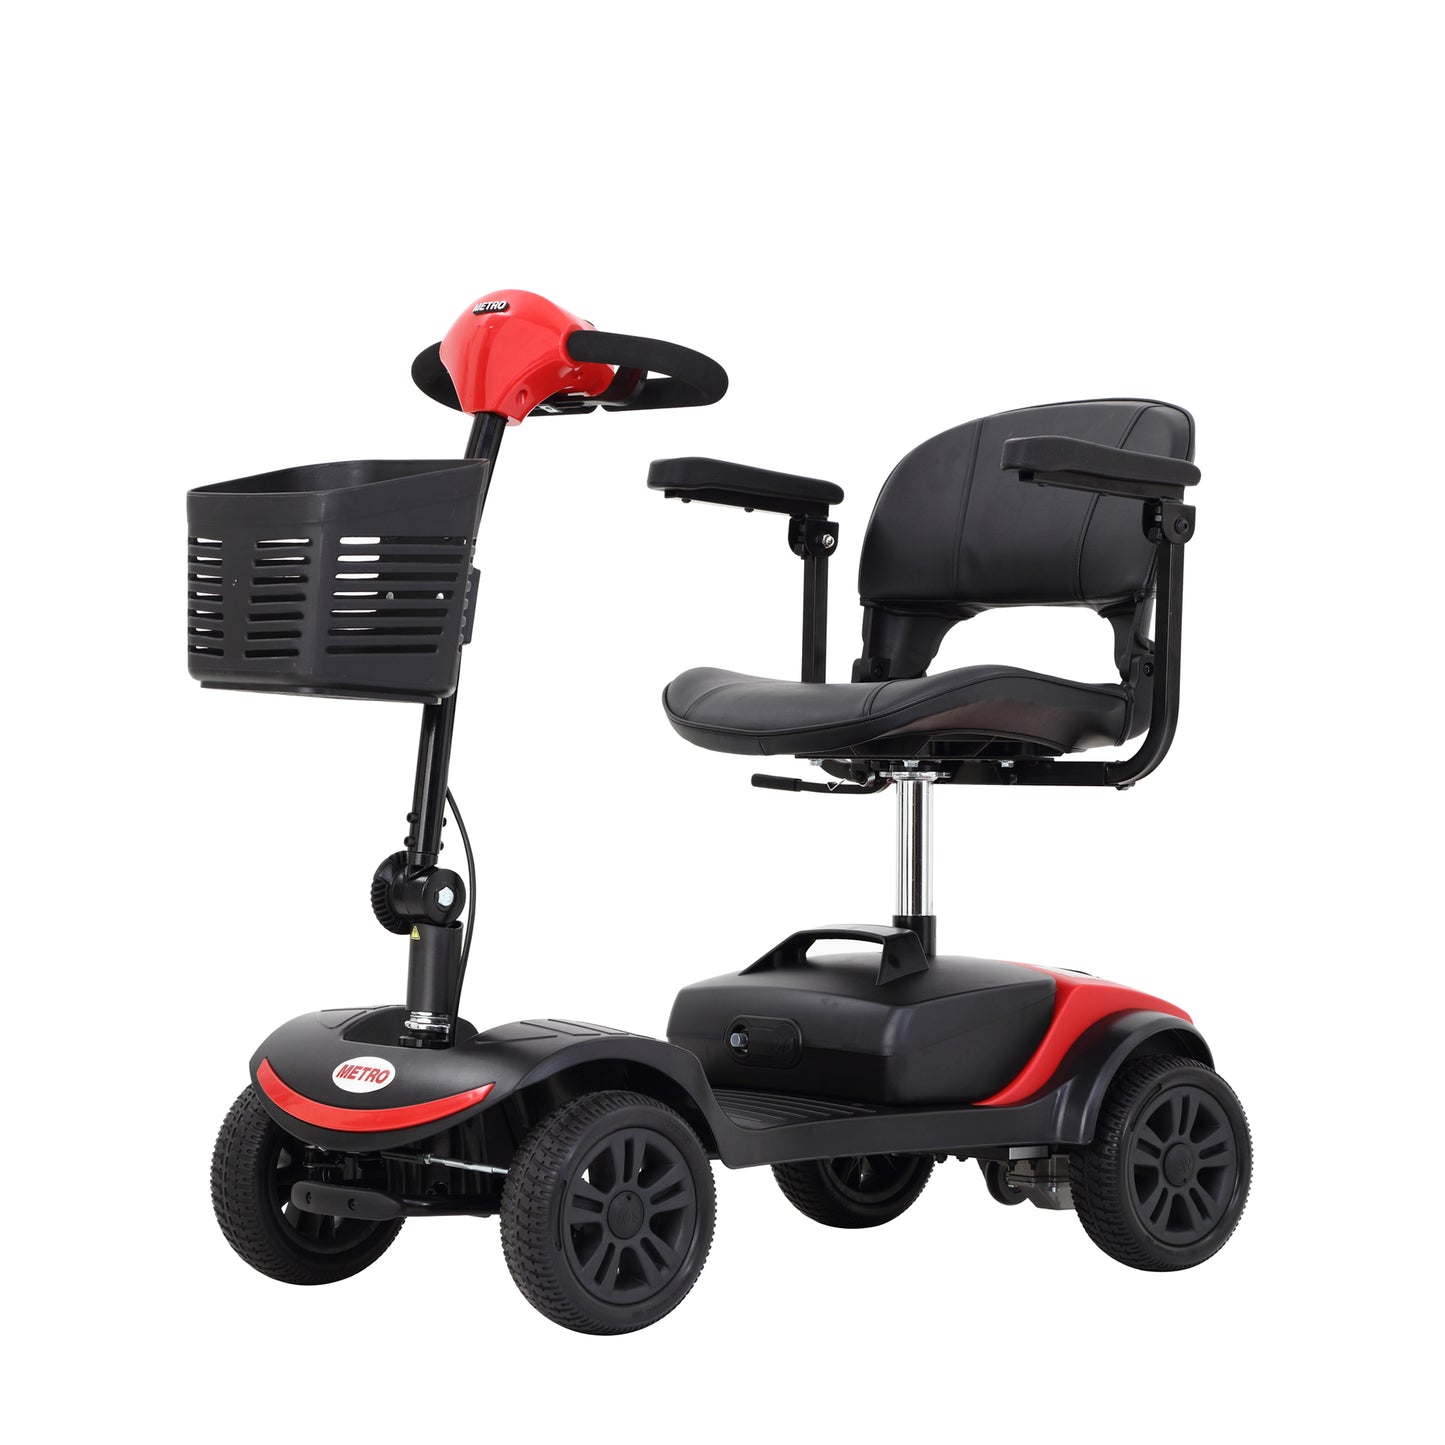 Metro M1 Lite Mobility Scooter - Red